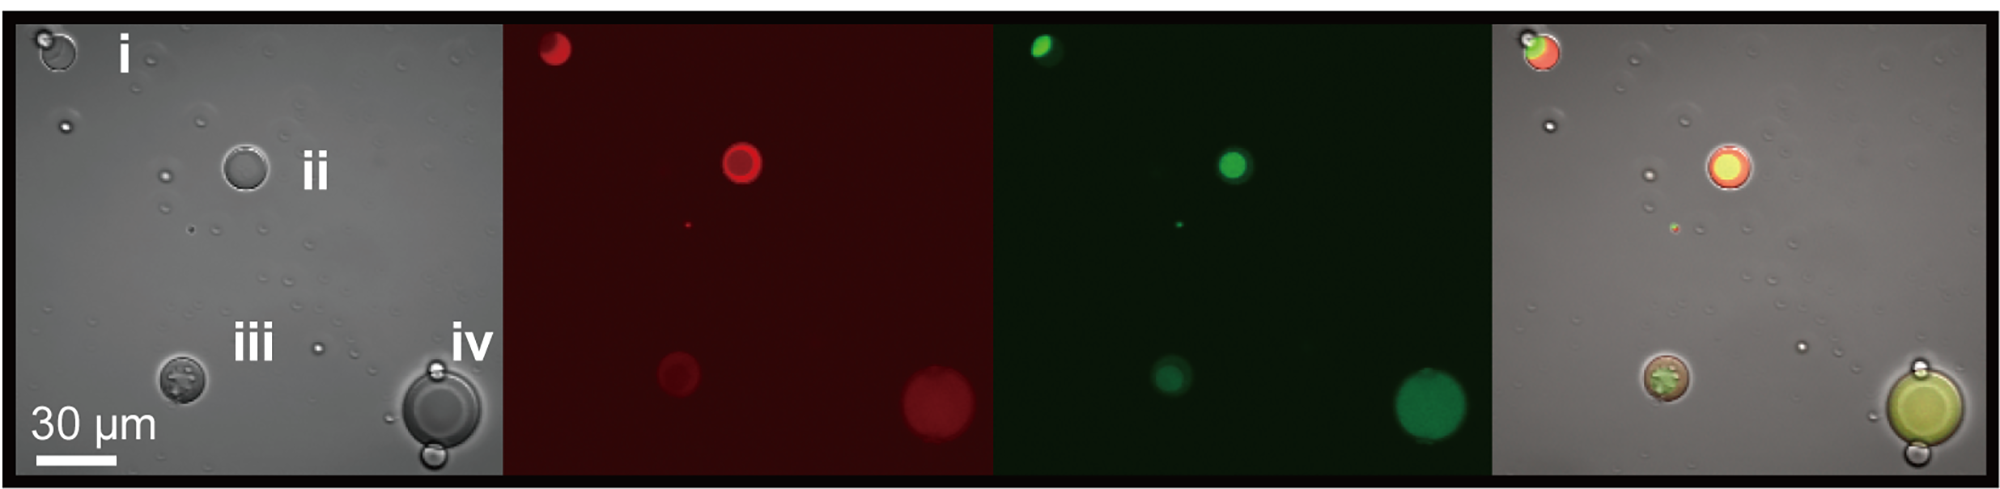 Four microscopic images showing separation in differentially sized cells (in grey, red, green, and red green combined)